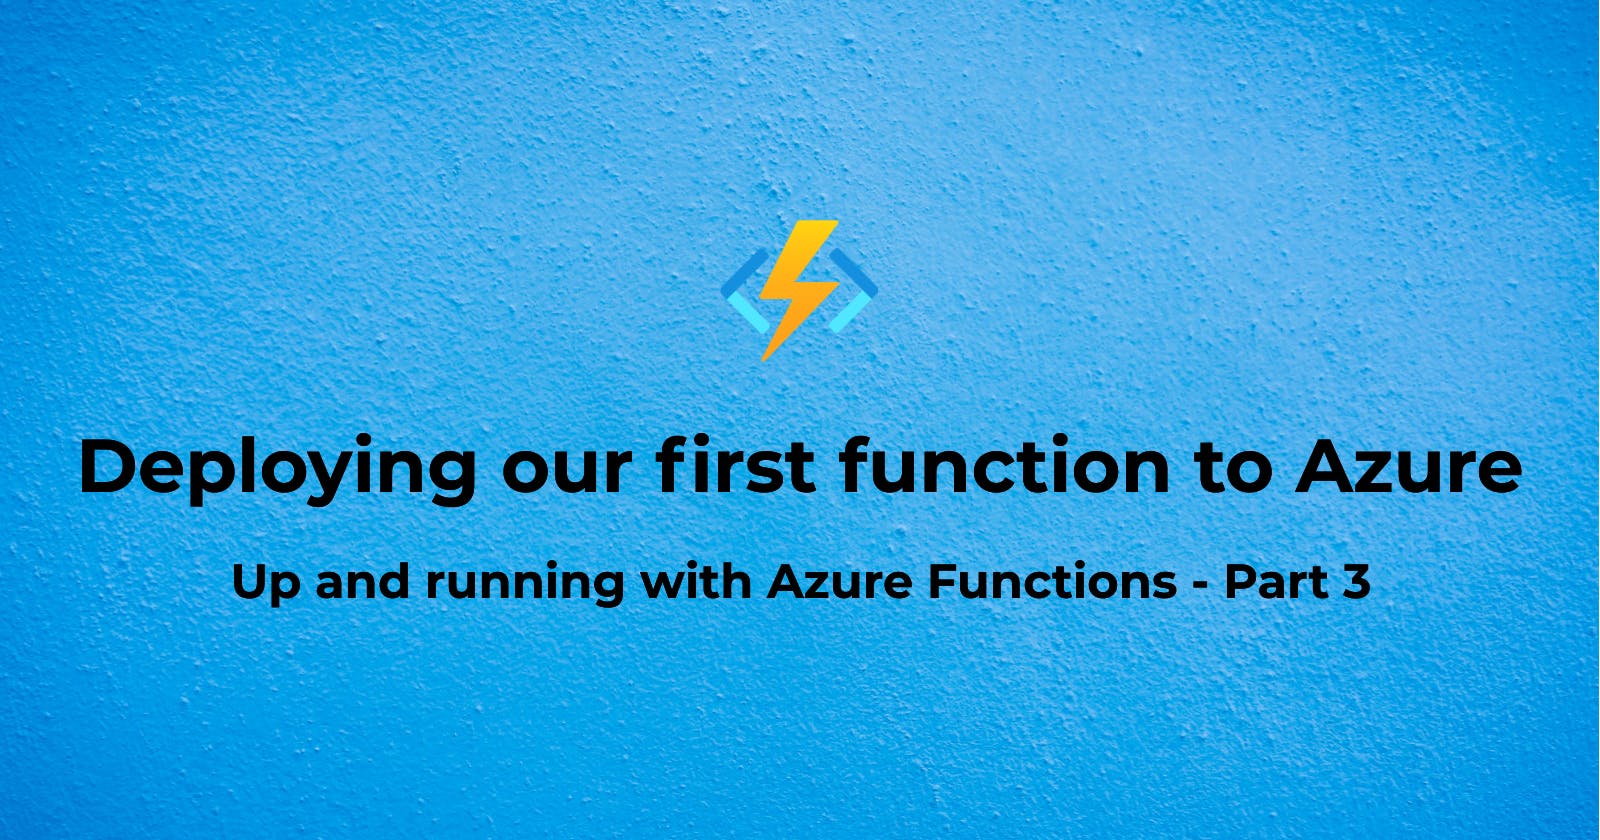 Deploying our first function to Azure